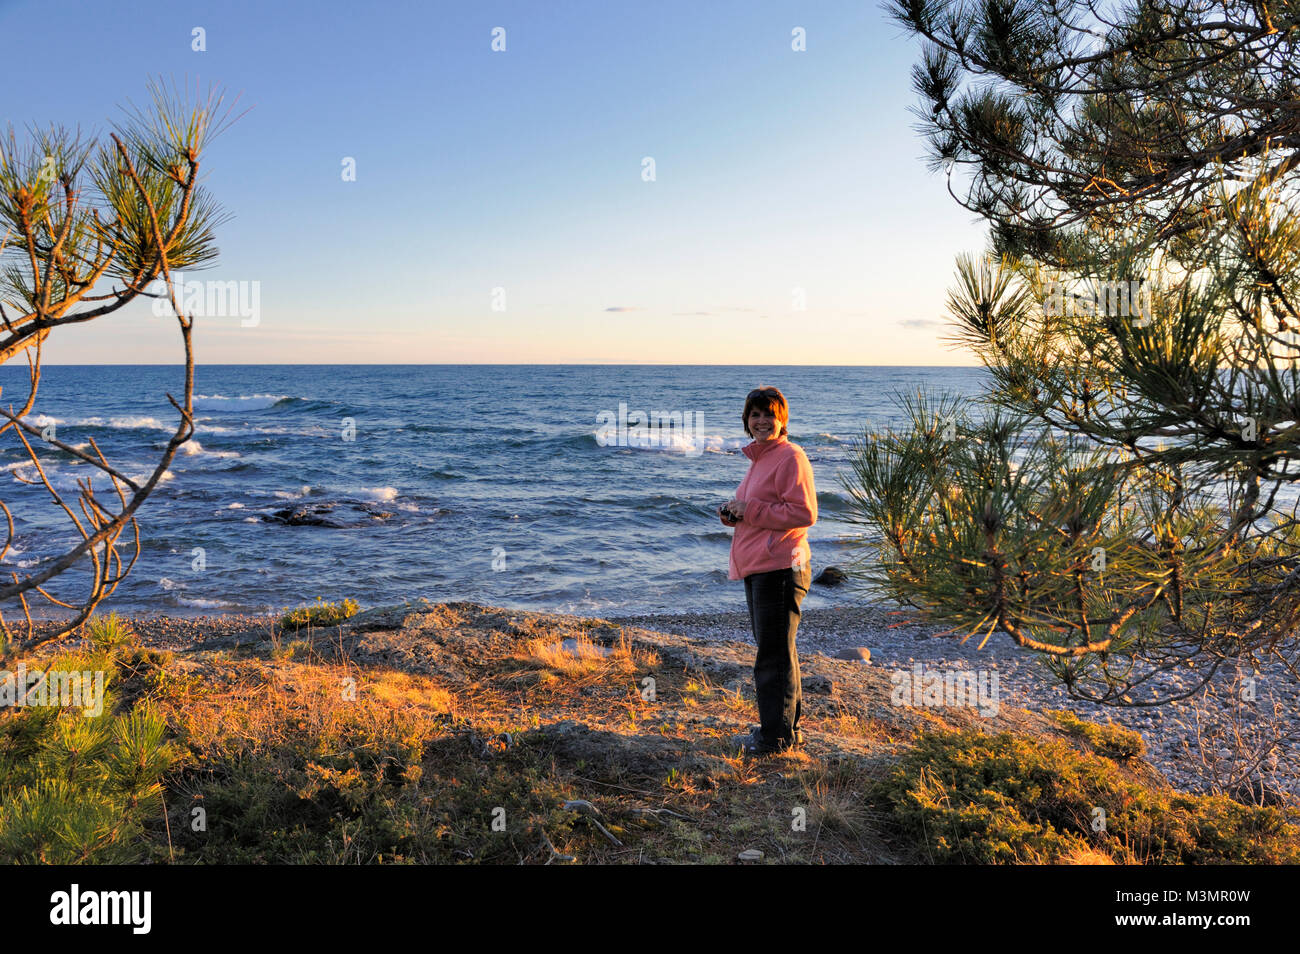 a woman smiling with her back to Bachawana bay, lake Superior Stock Photo